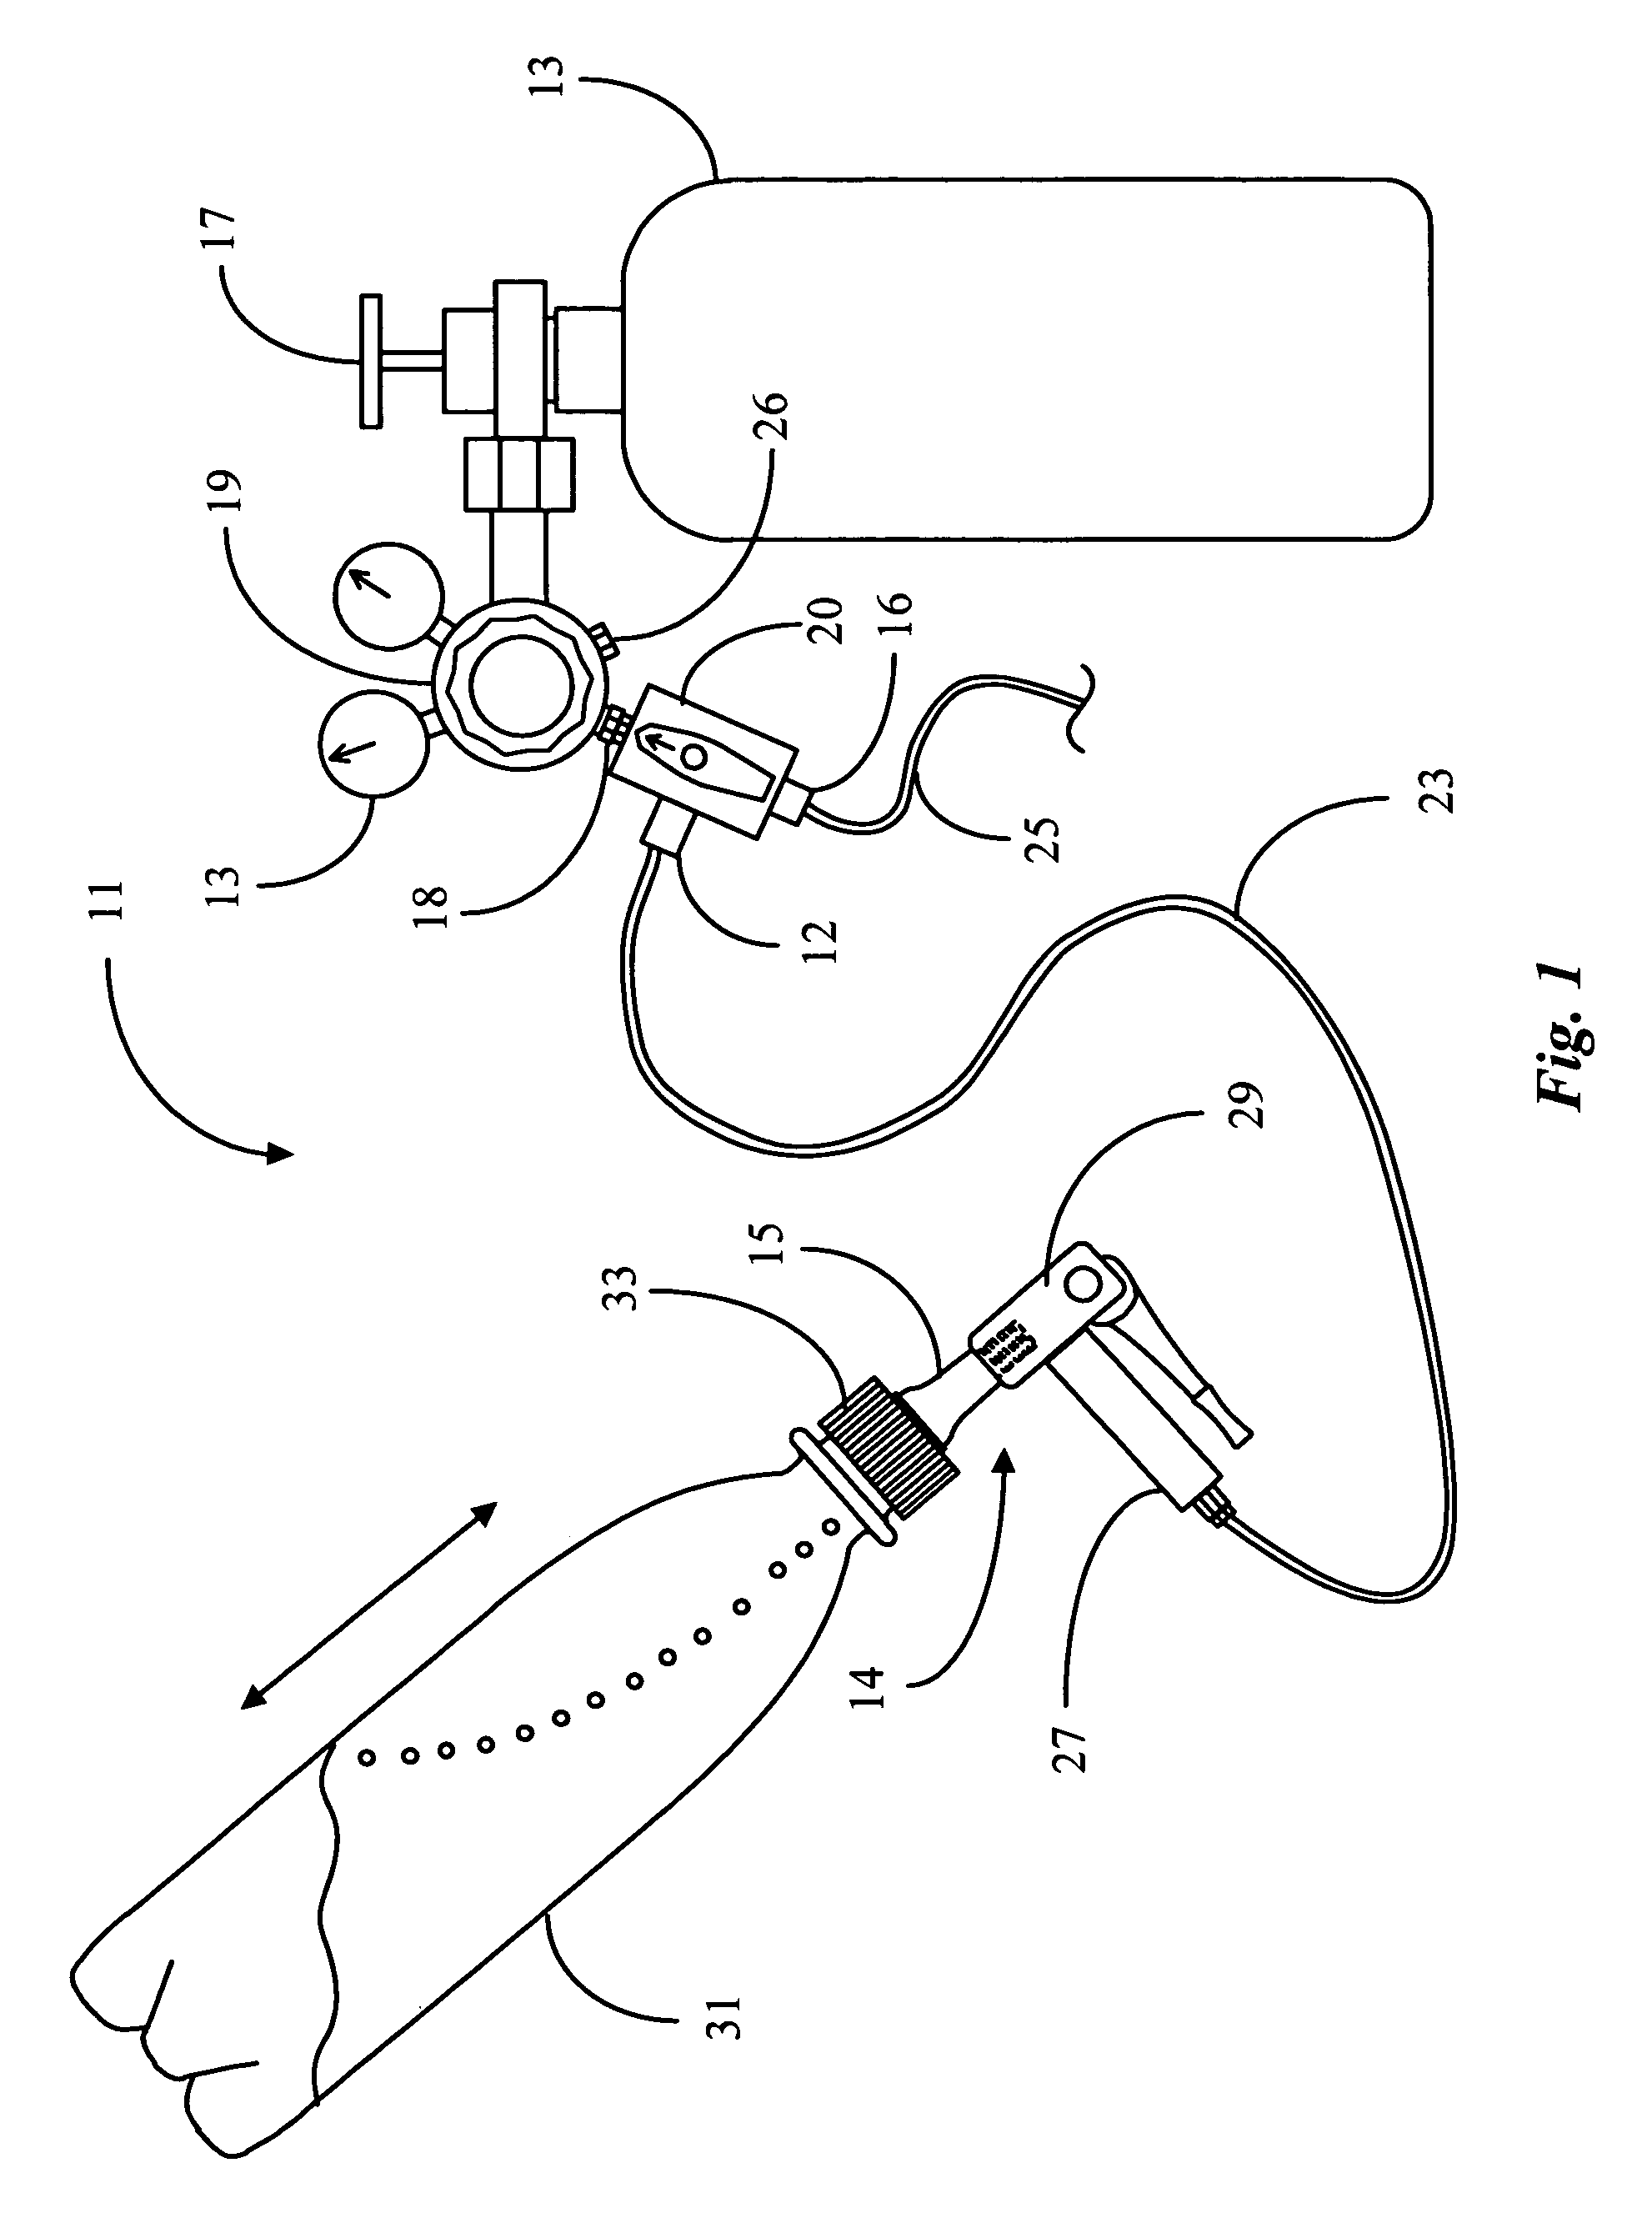 Method and apparatus for preserving beverages and foodstuff